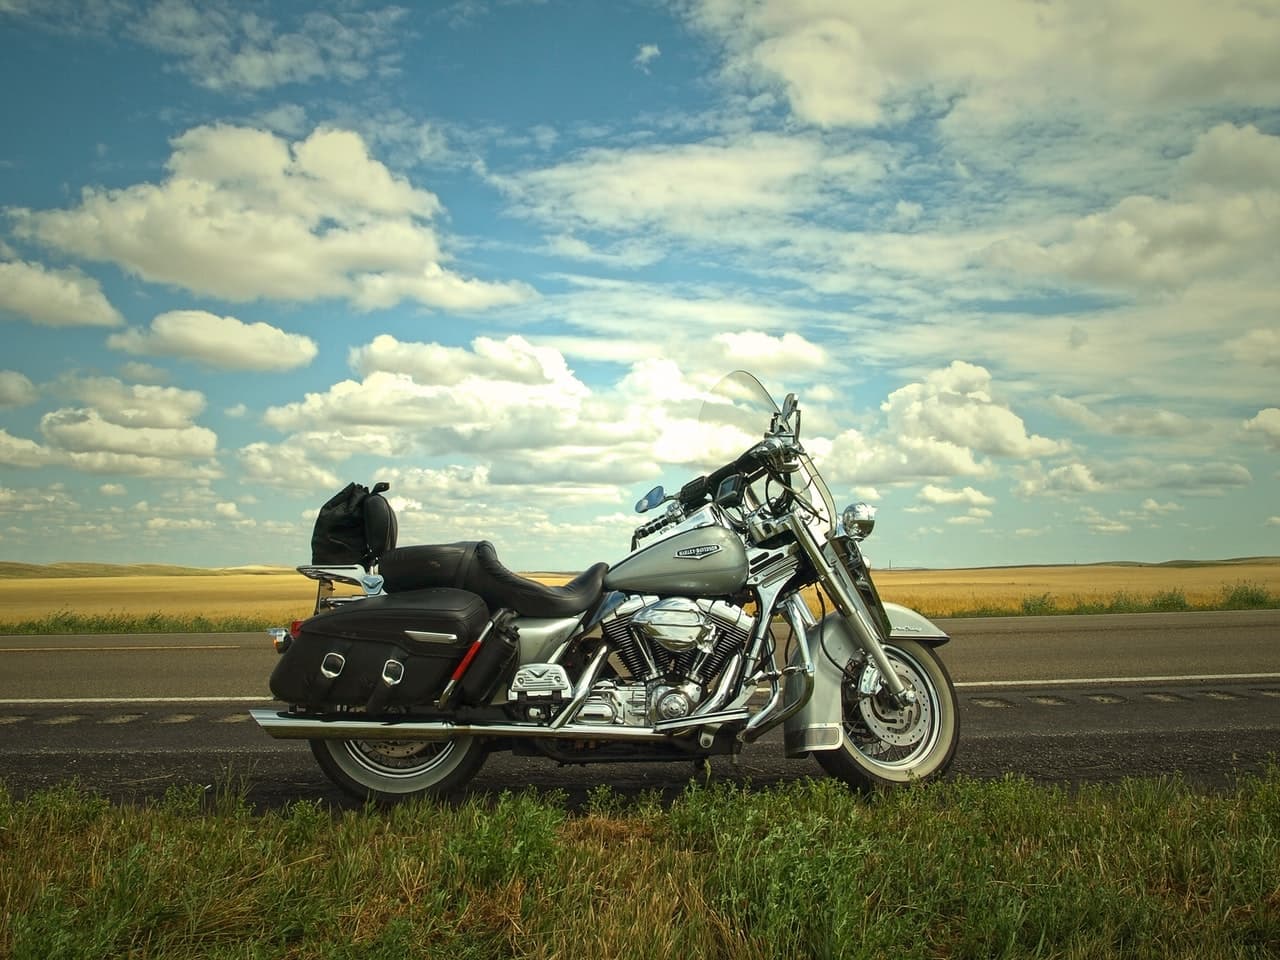 Motorcycle in front of blue sky